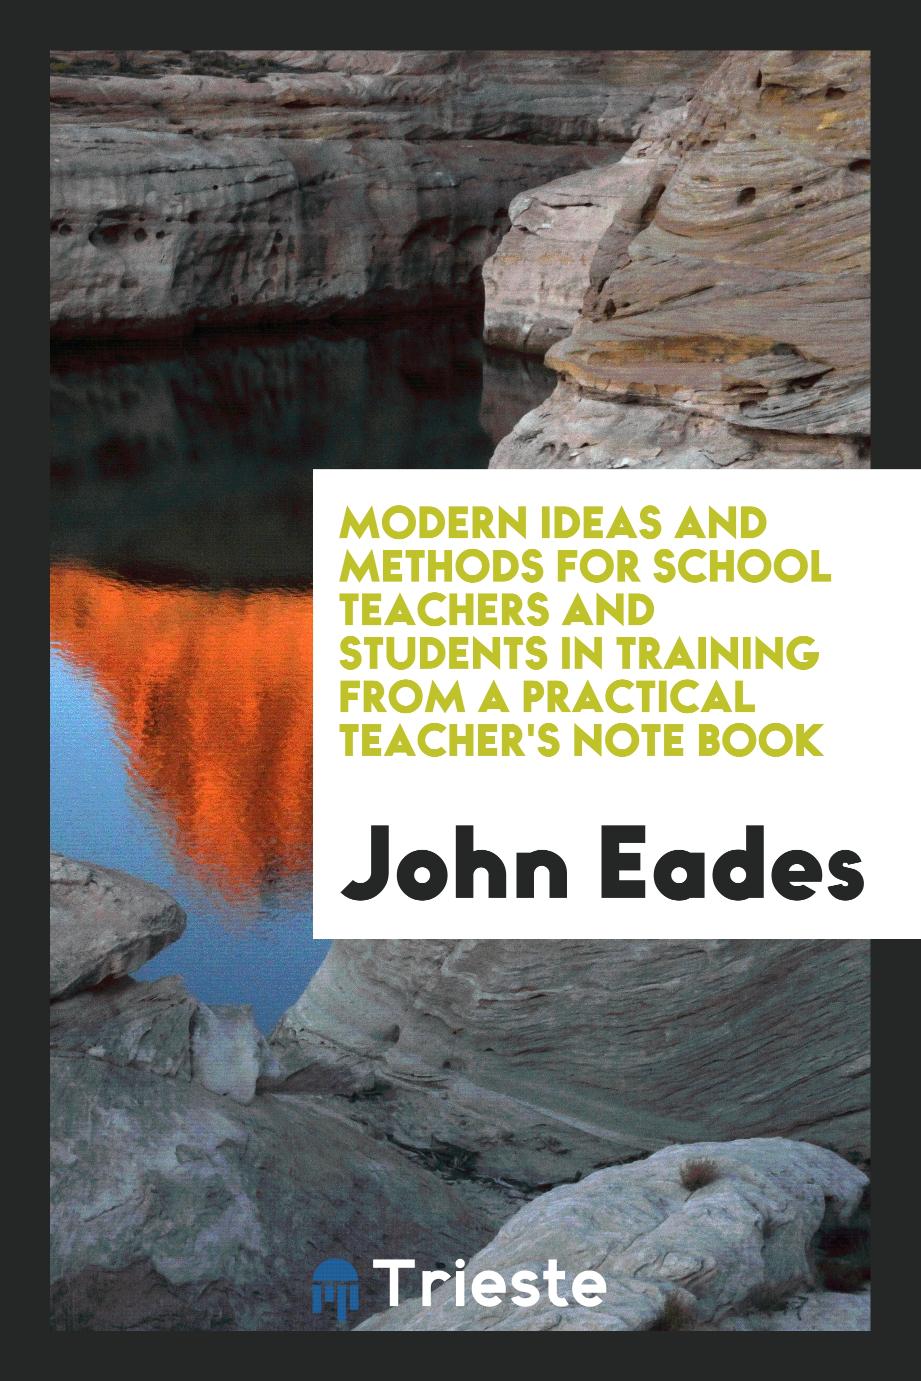 Modern ideas and methods for school teachers and students in training from a practical teacher's note book